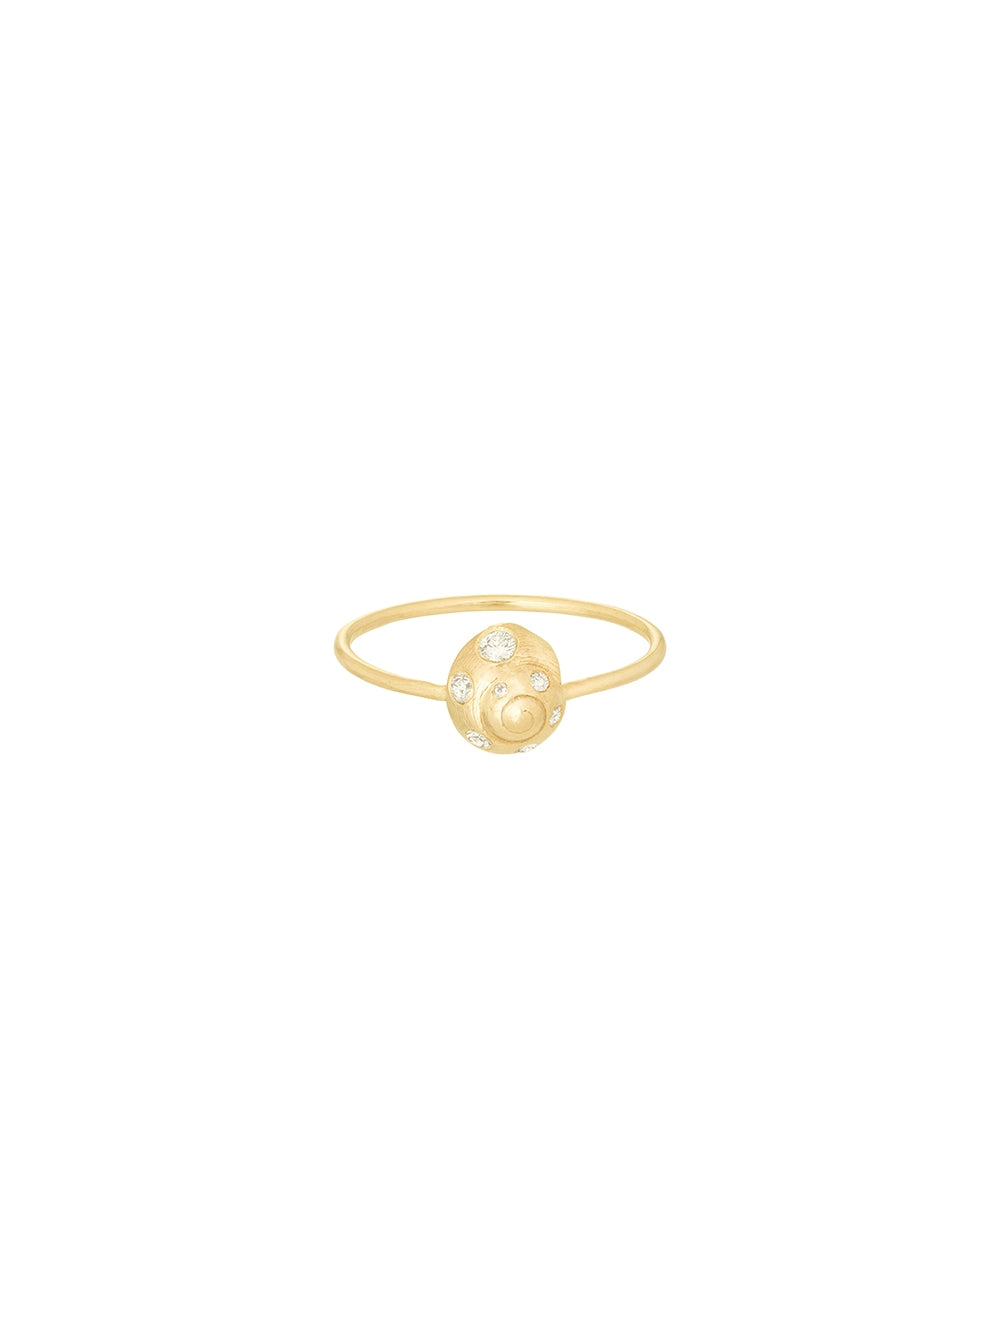 SHELL AND DIAMONDS RING